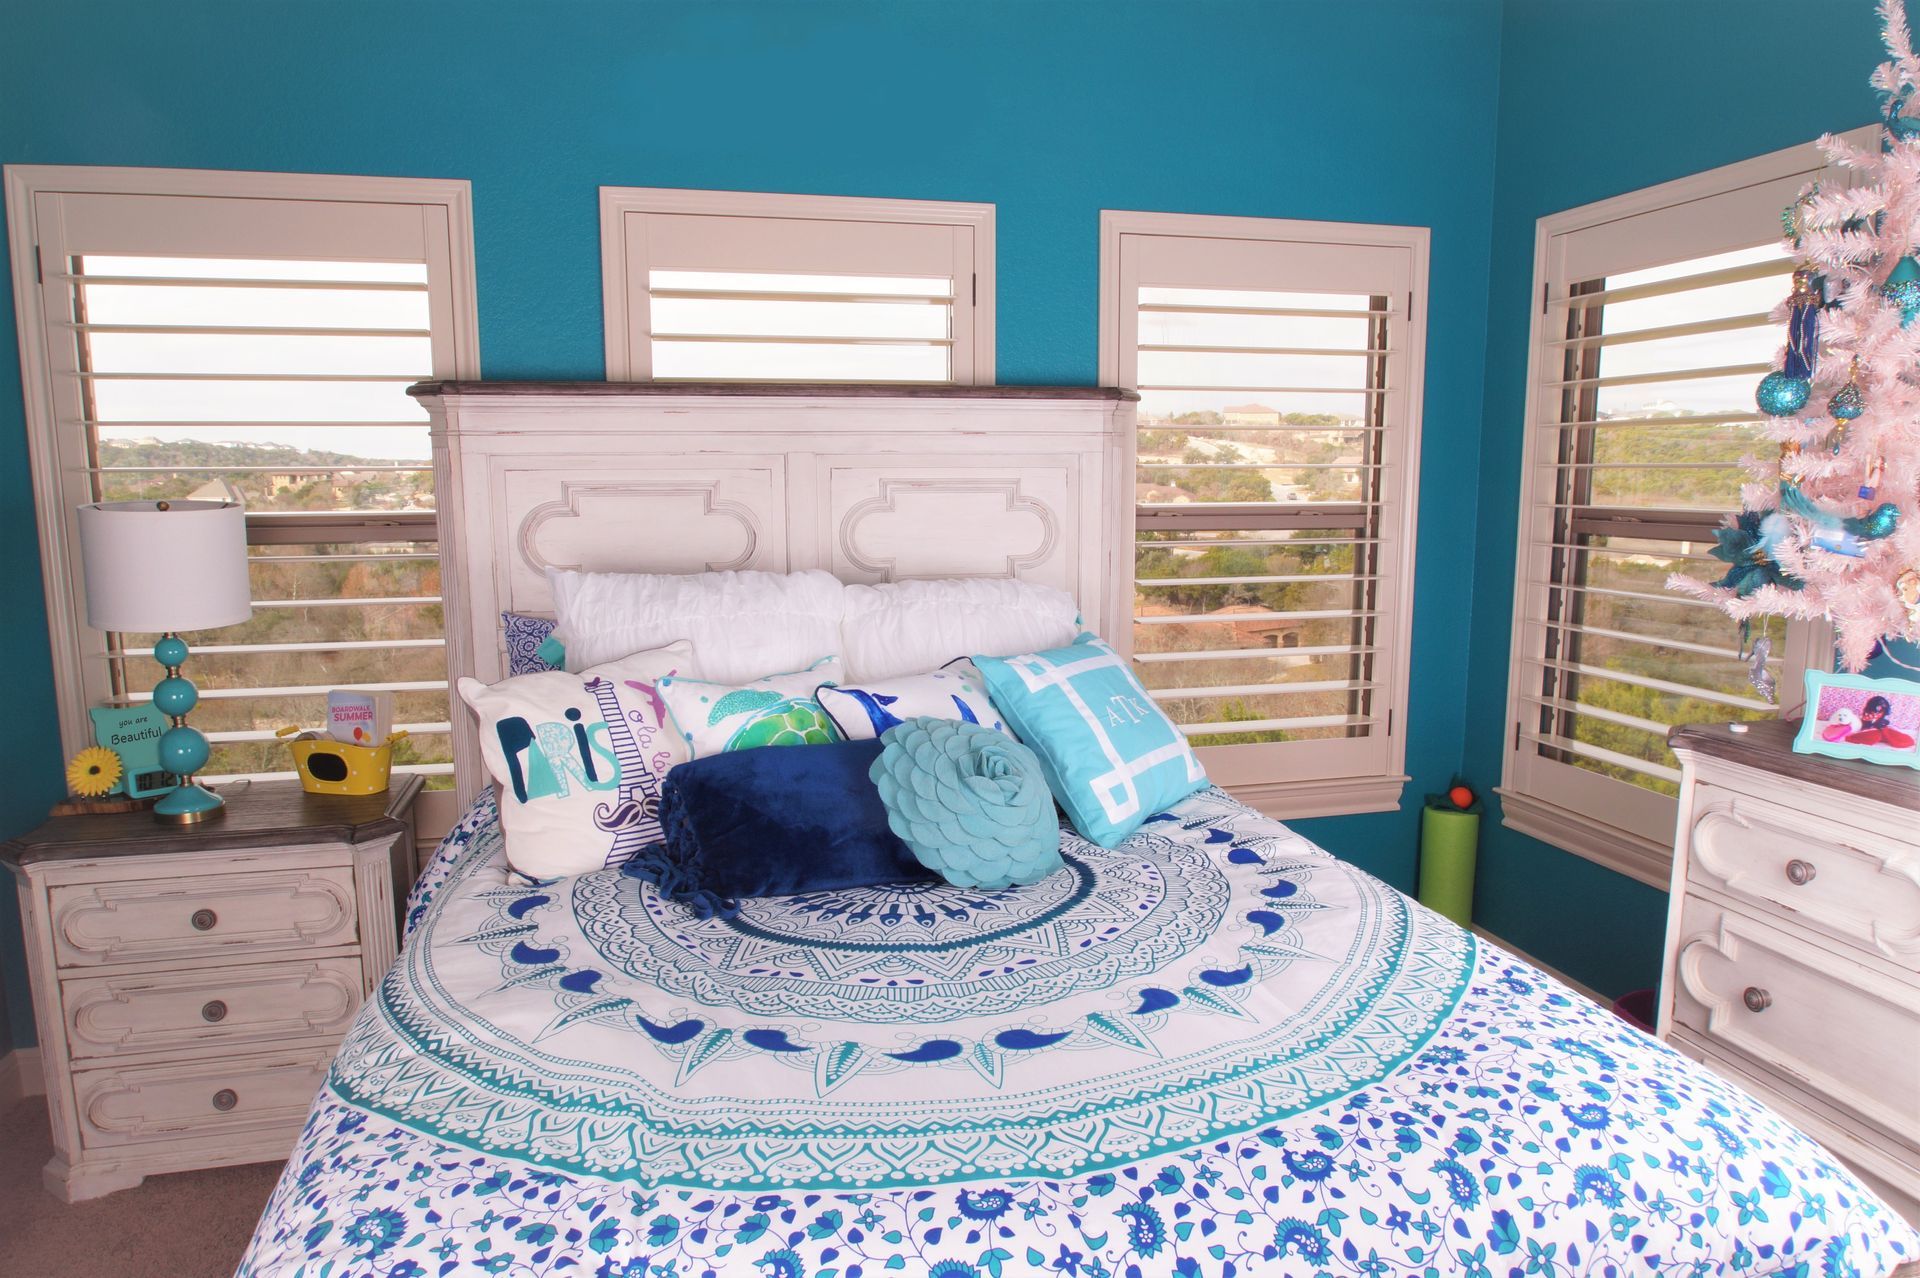 White plantation blinds cover the windows in a cheerful, blue child's bedroom in Leander